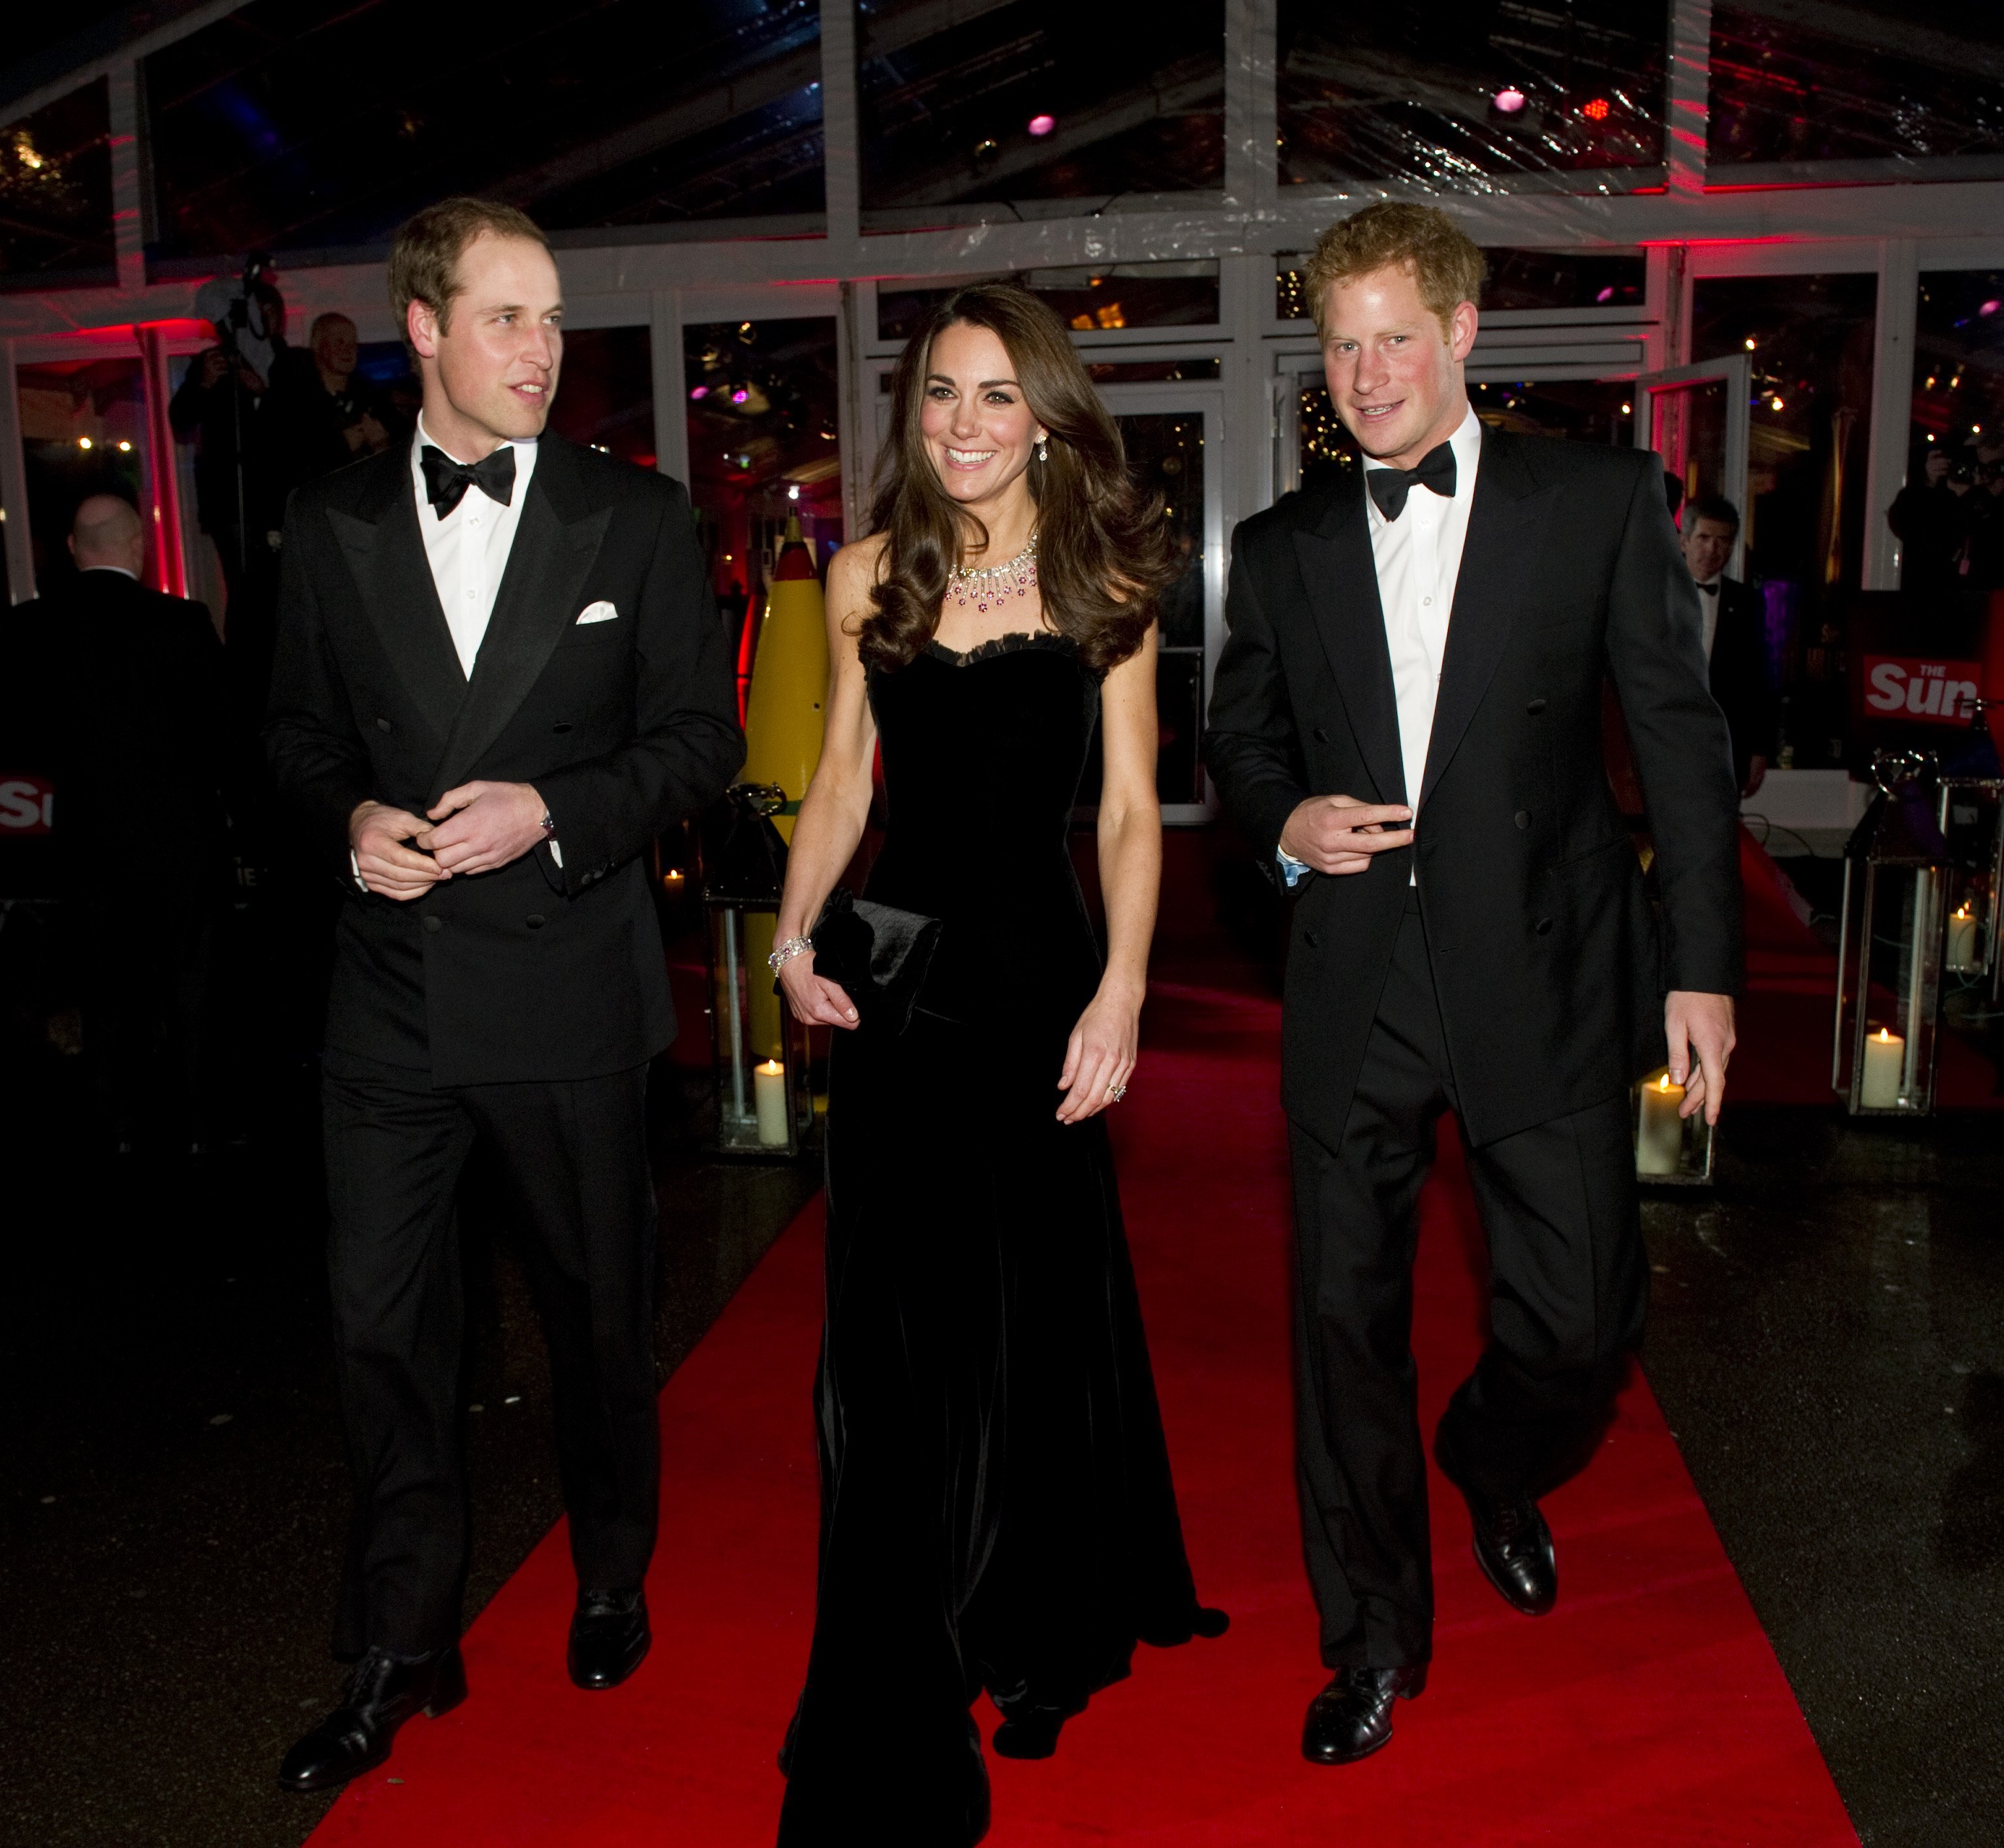 Prince William, Kate Middleton, and Prince Harry attending The Sun Military Awards at Imperial War Museum on December 19, 2011 in London, England. / Source: Getty Images